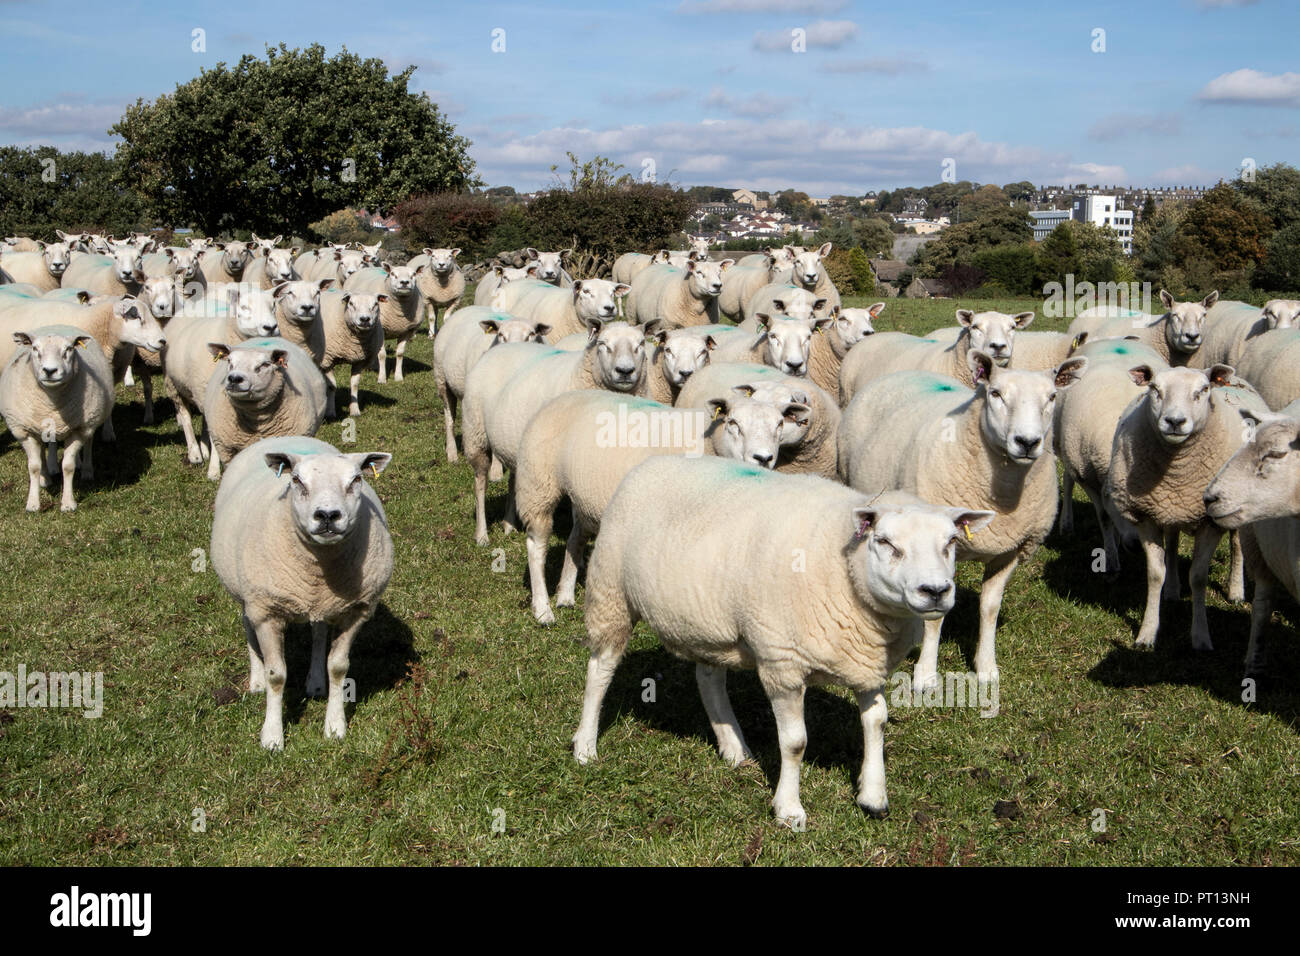 A flock of Texel Sheep in Rawdon, Leeds, West Yorkshire Could be Meatline Sheep Stock Photo